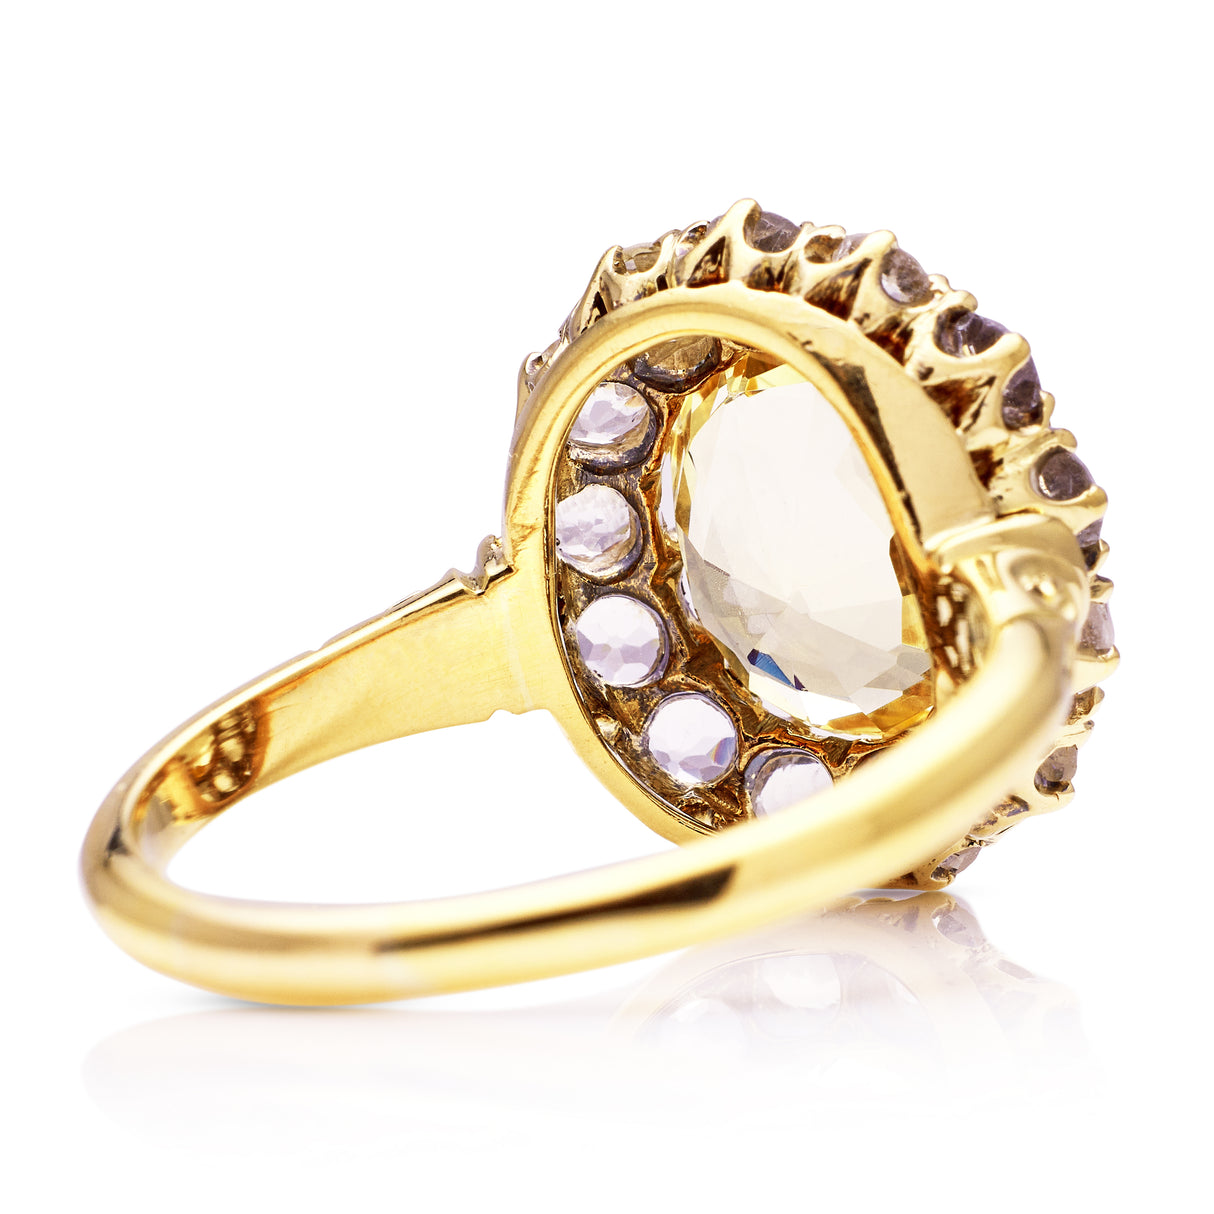 Antique, Victorian, Yellow and White Sapphire Cluster Ring, 18ct Yellow Gold. Back of the ring.